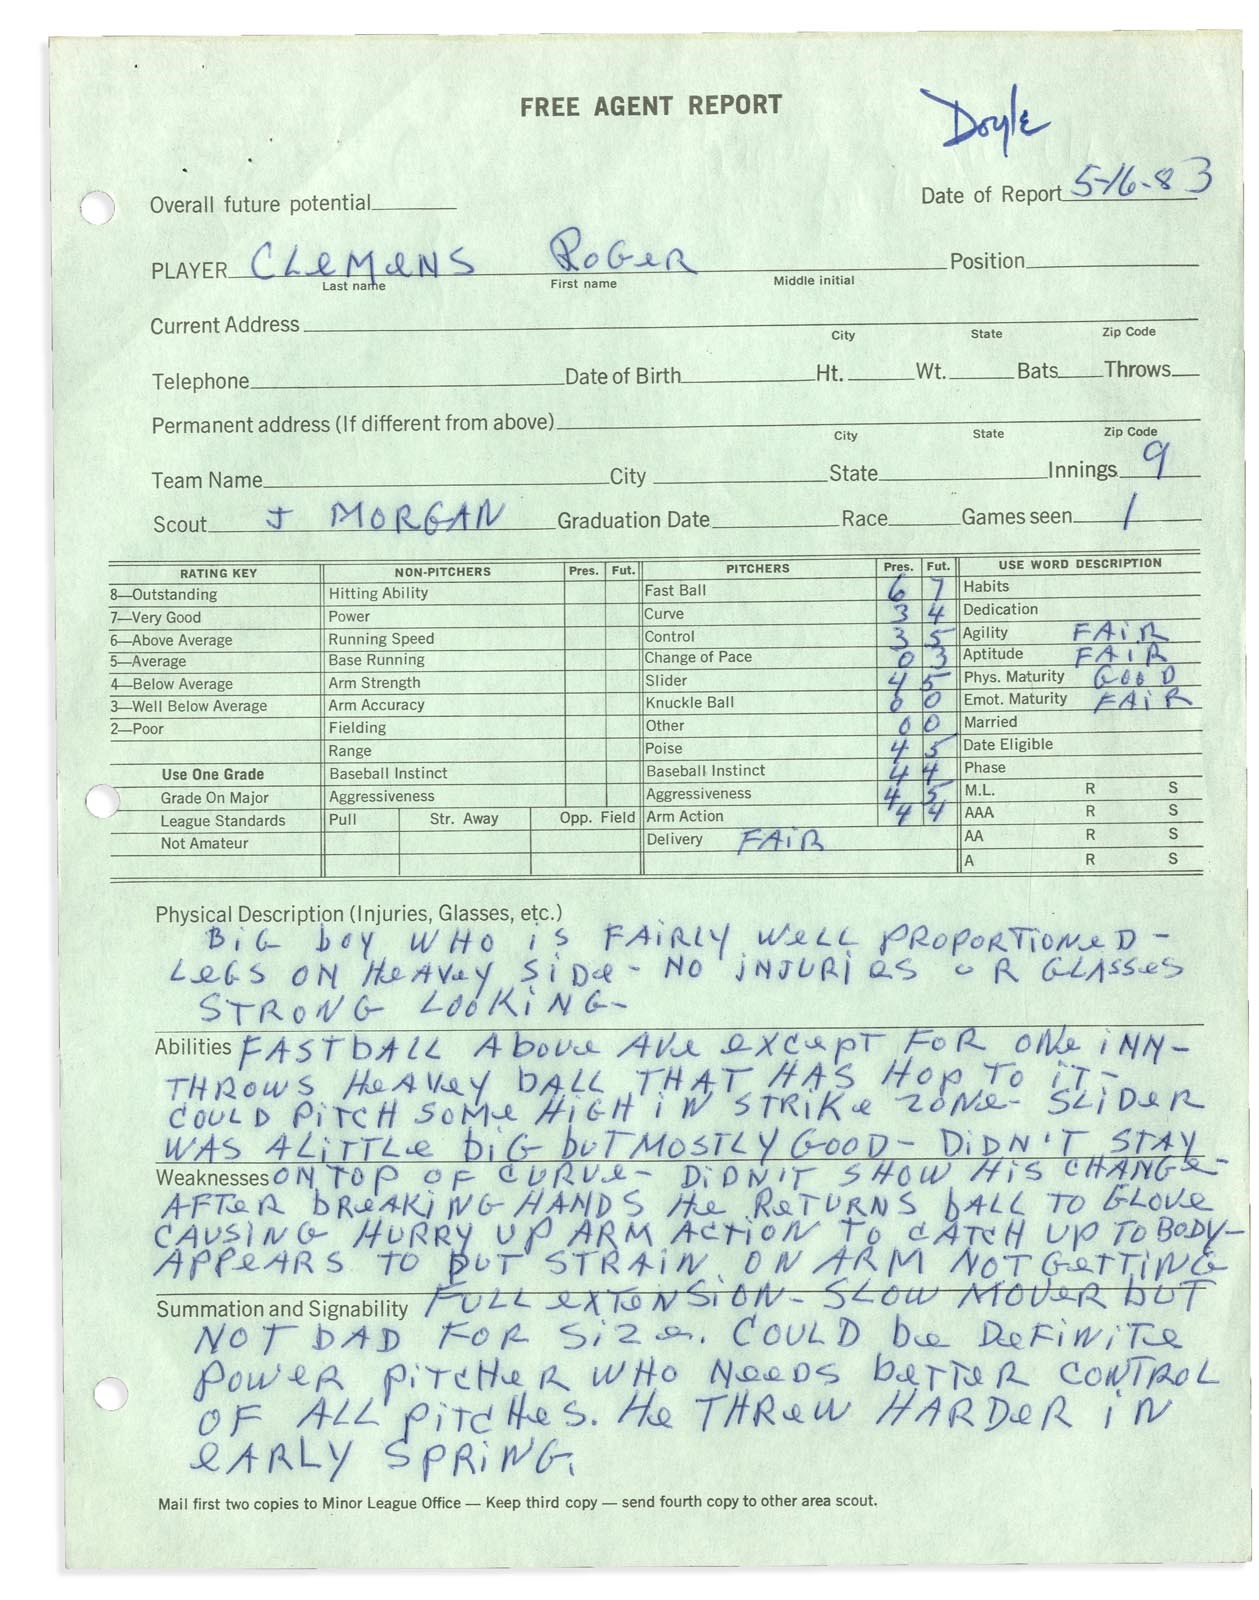 Boston Sports - 1983 Roger Clemens Scouting Report